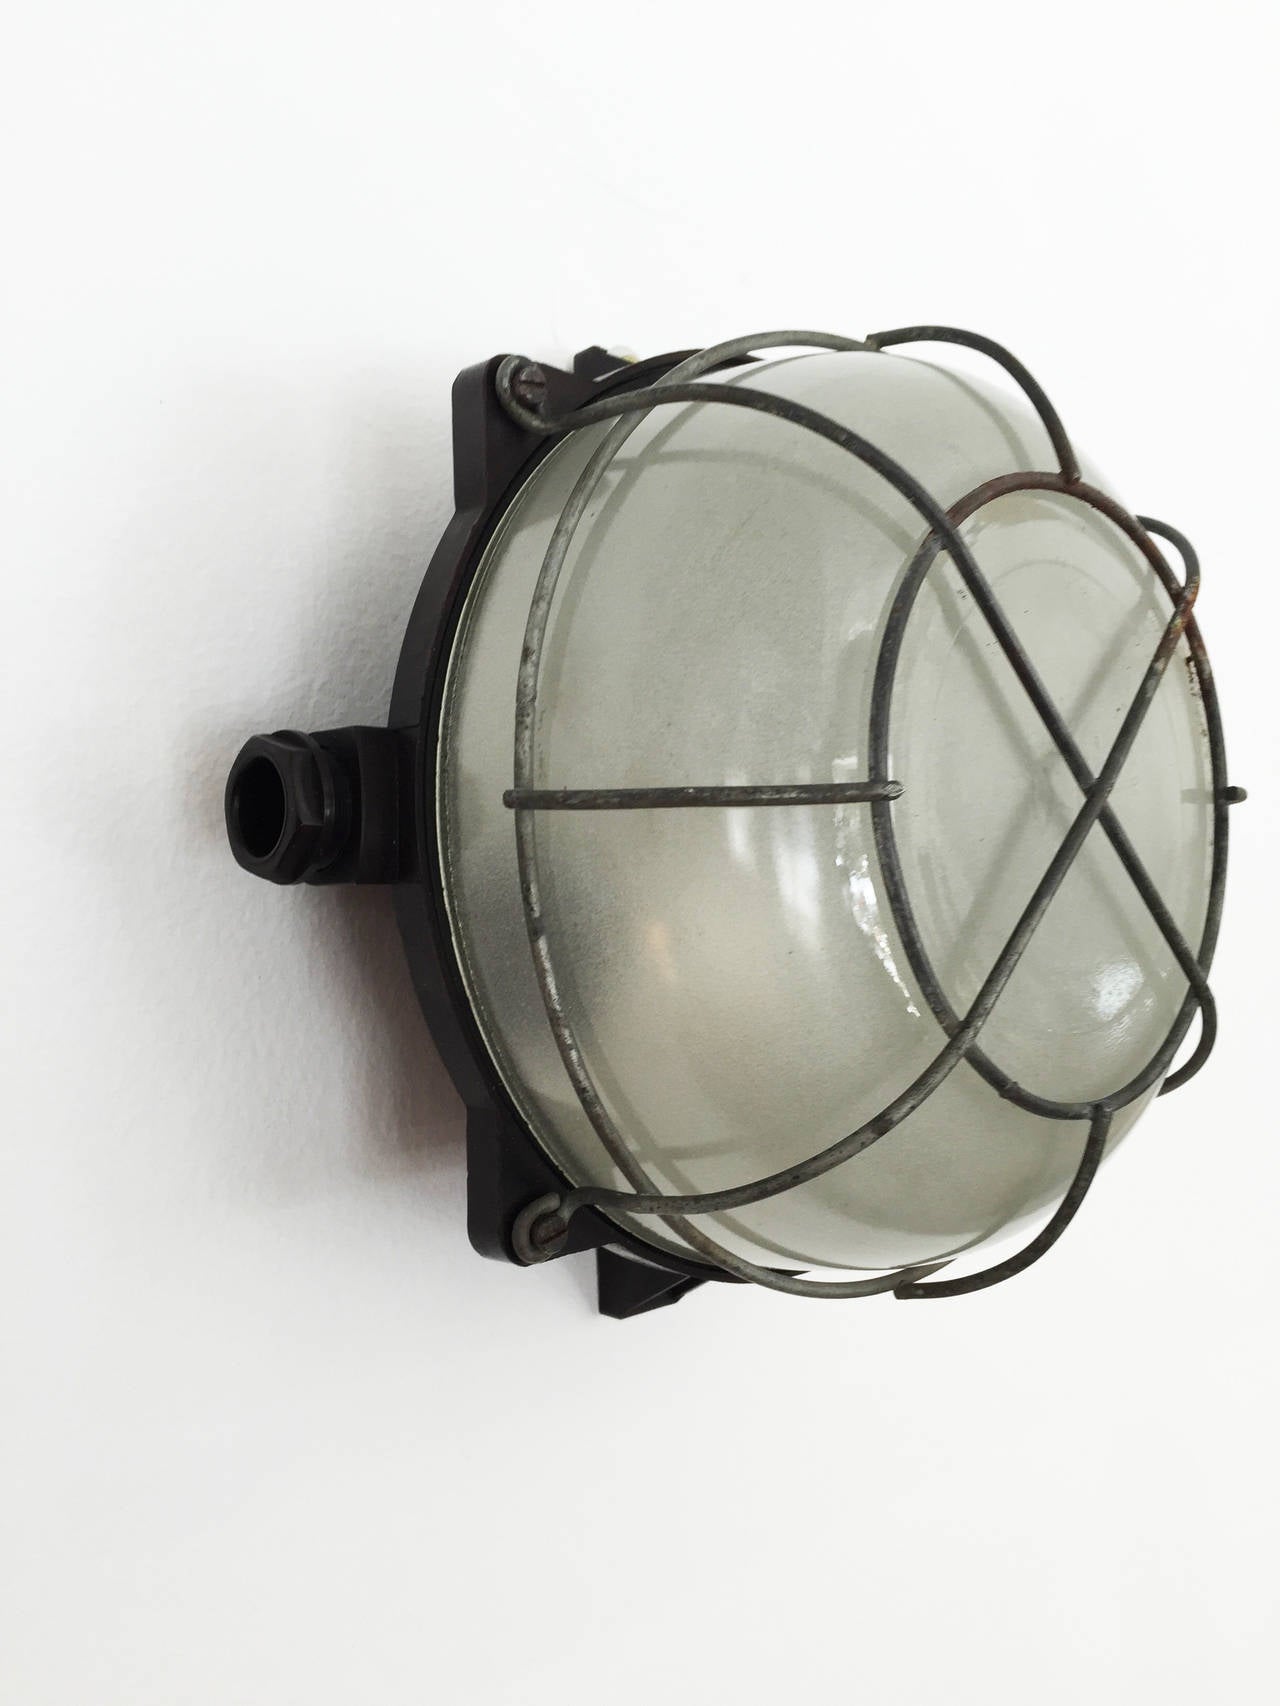 Bakelite wall of ceiling industial or factory lamp from late 1940s
up to 14 pieces available